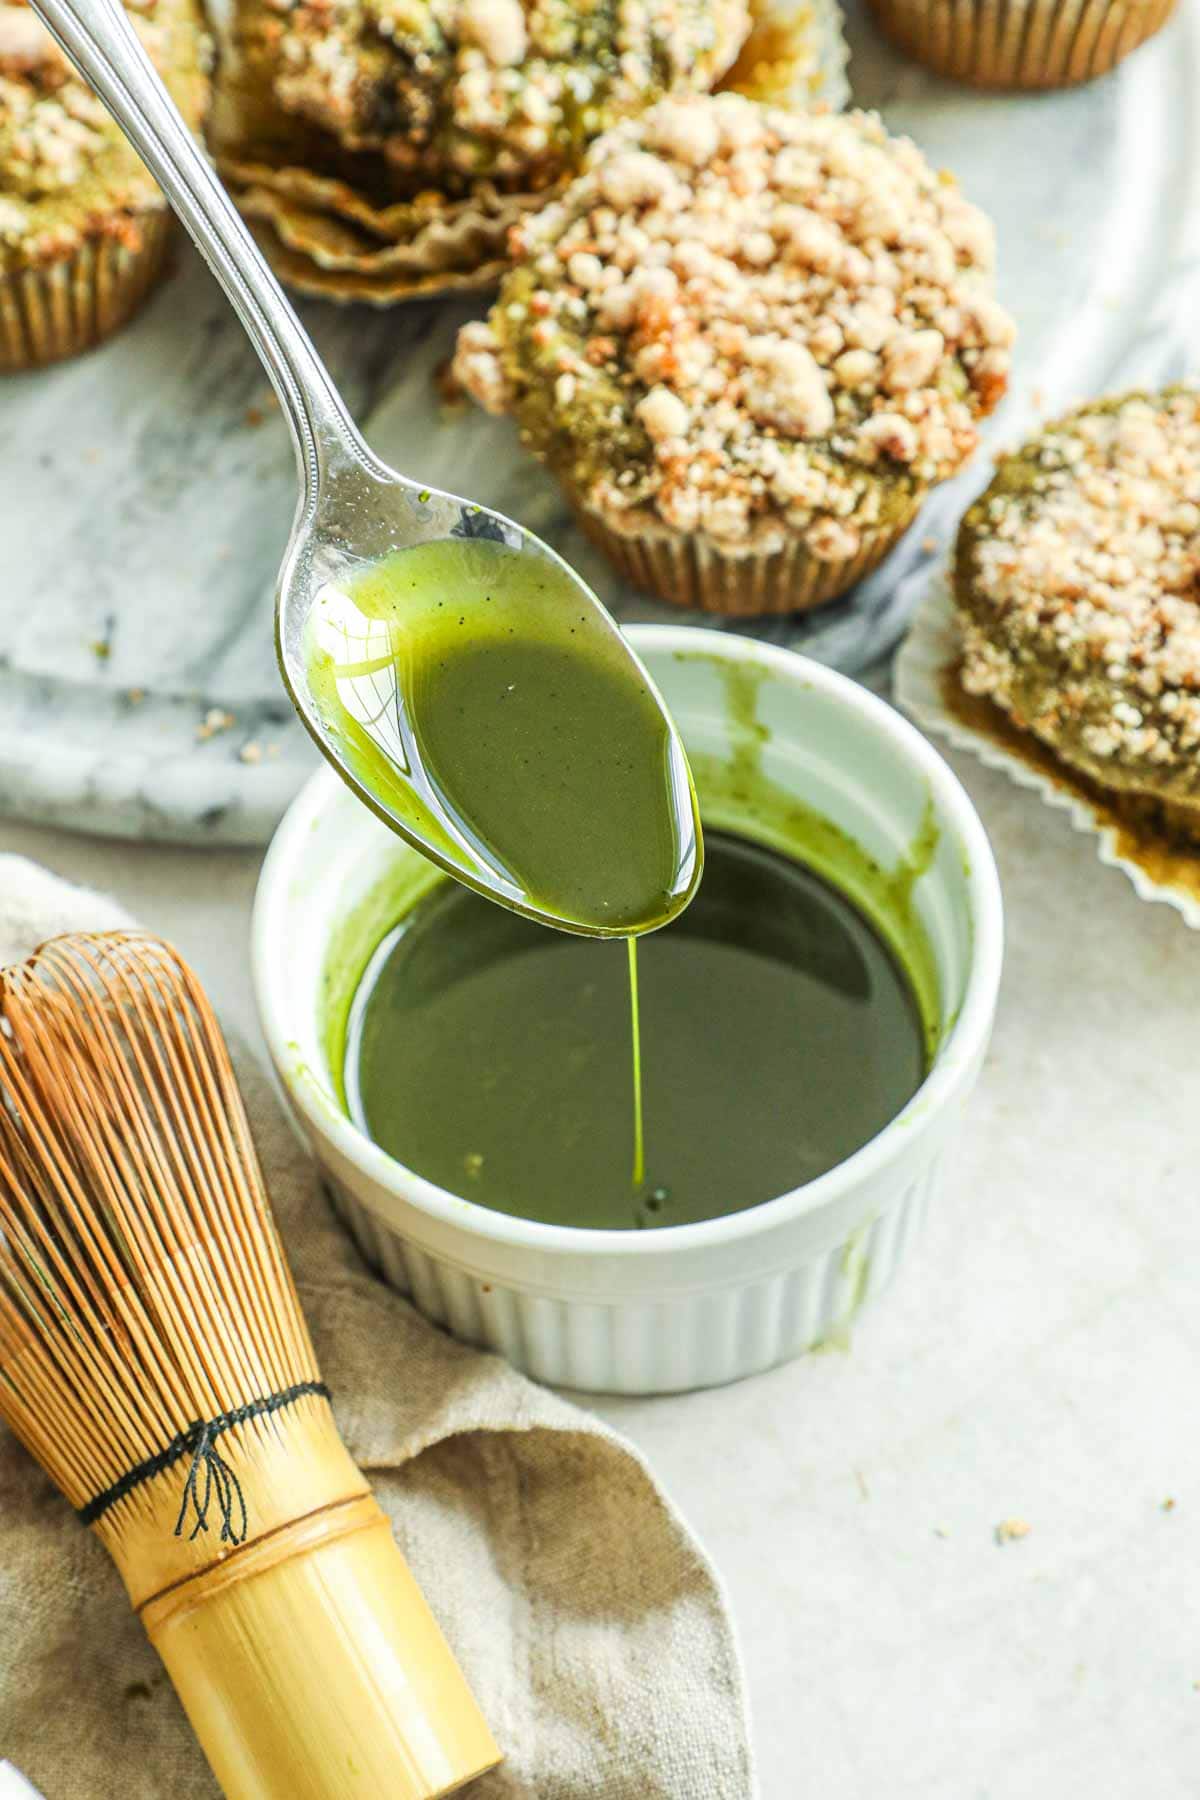 Spoon pouring matcha vanilla bean glaze for cakes, muffins, quick breads, and more in a white ceramic ramekin.